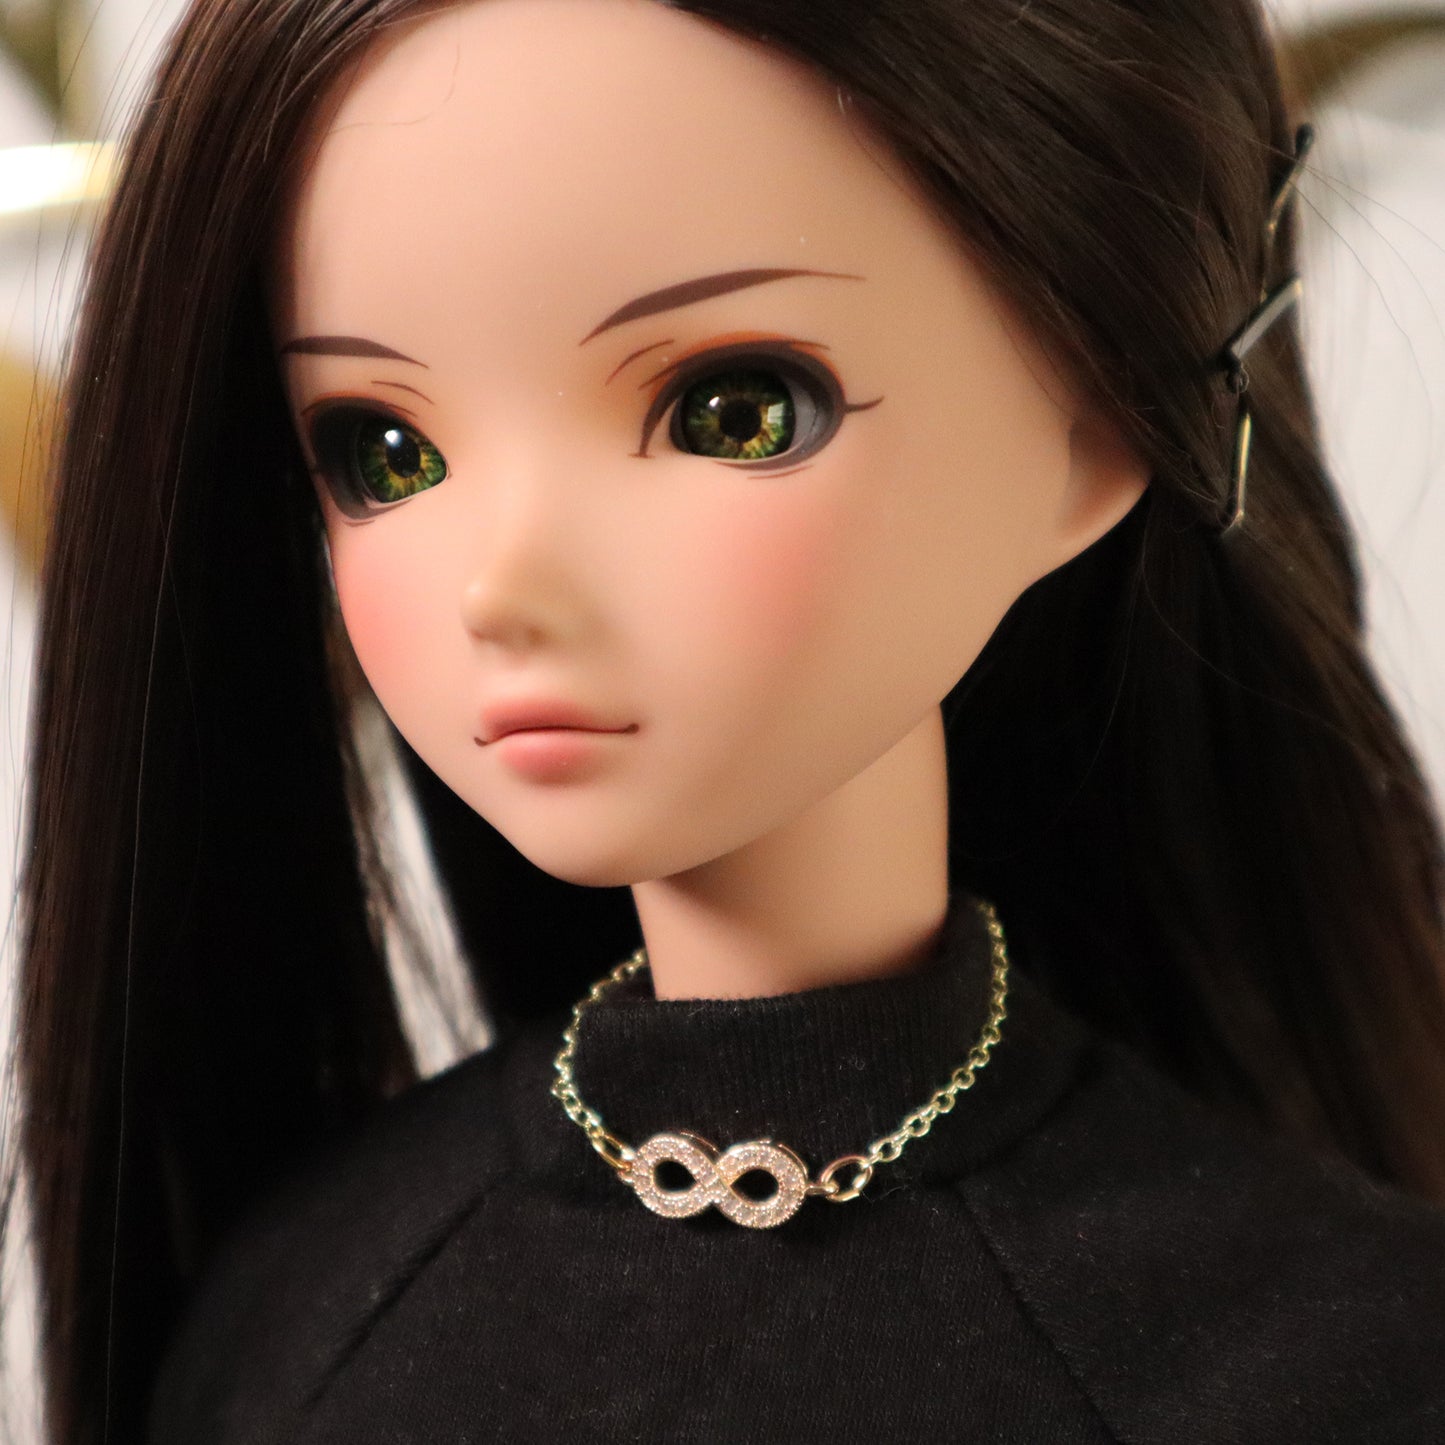 Magnetic Clasp Necklace for BJD - Infinity